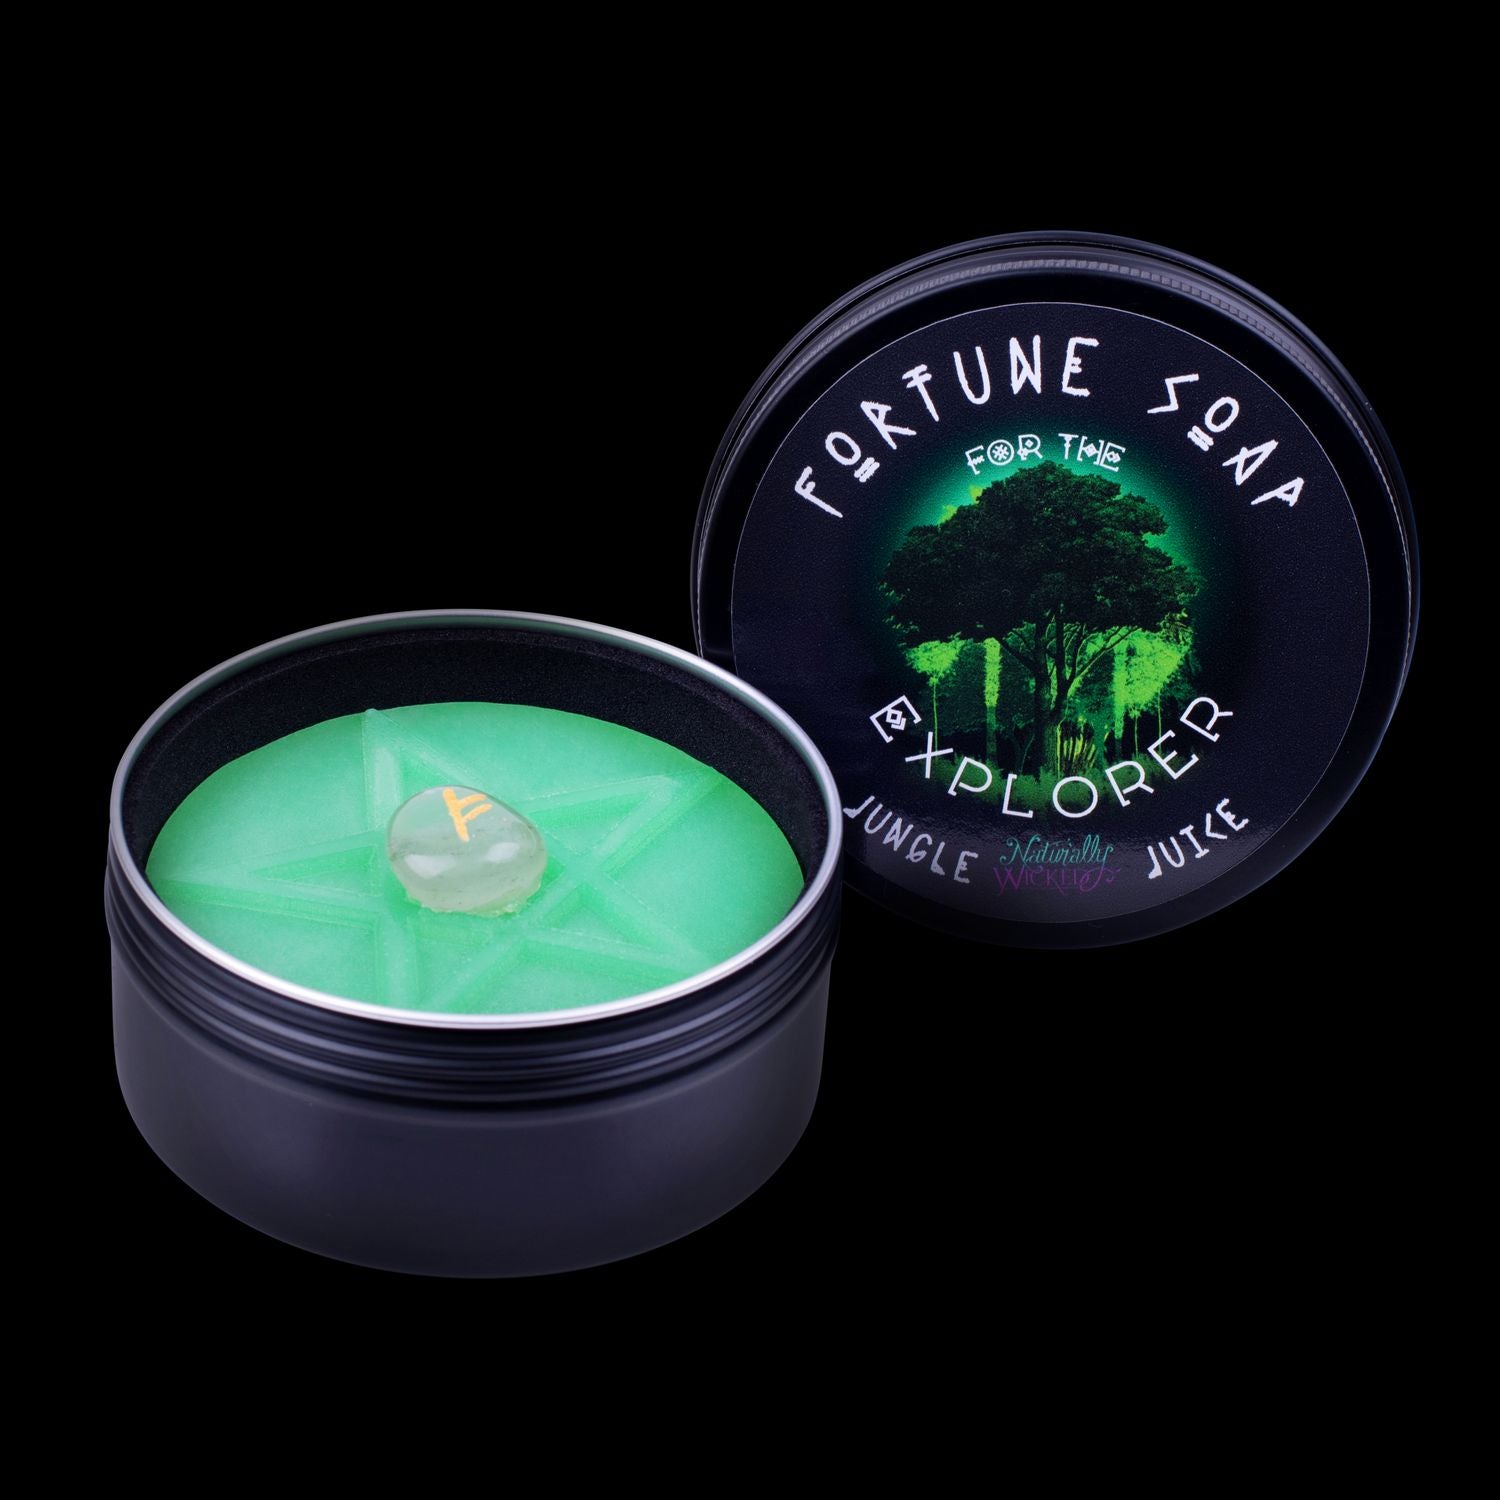 Naturally Wicked Fortune Soap For The Explorer, Green Plant-based Soap, Aventurine Crystal, Jungle Juice Scent & Black Gloss Gift Tin Included.